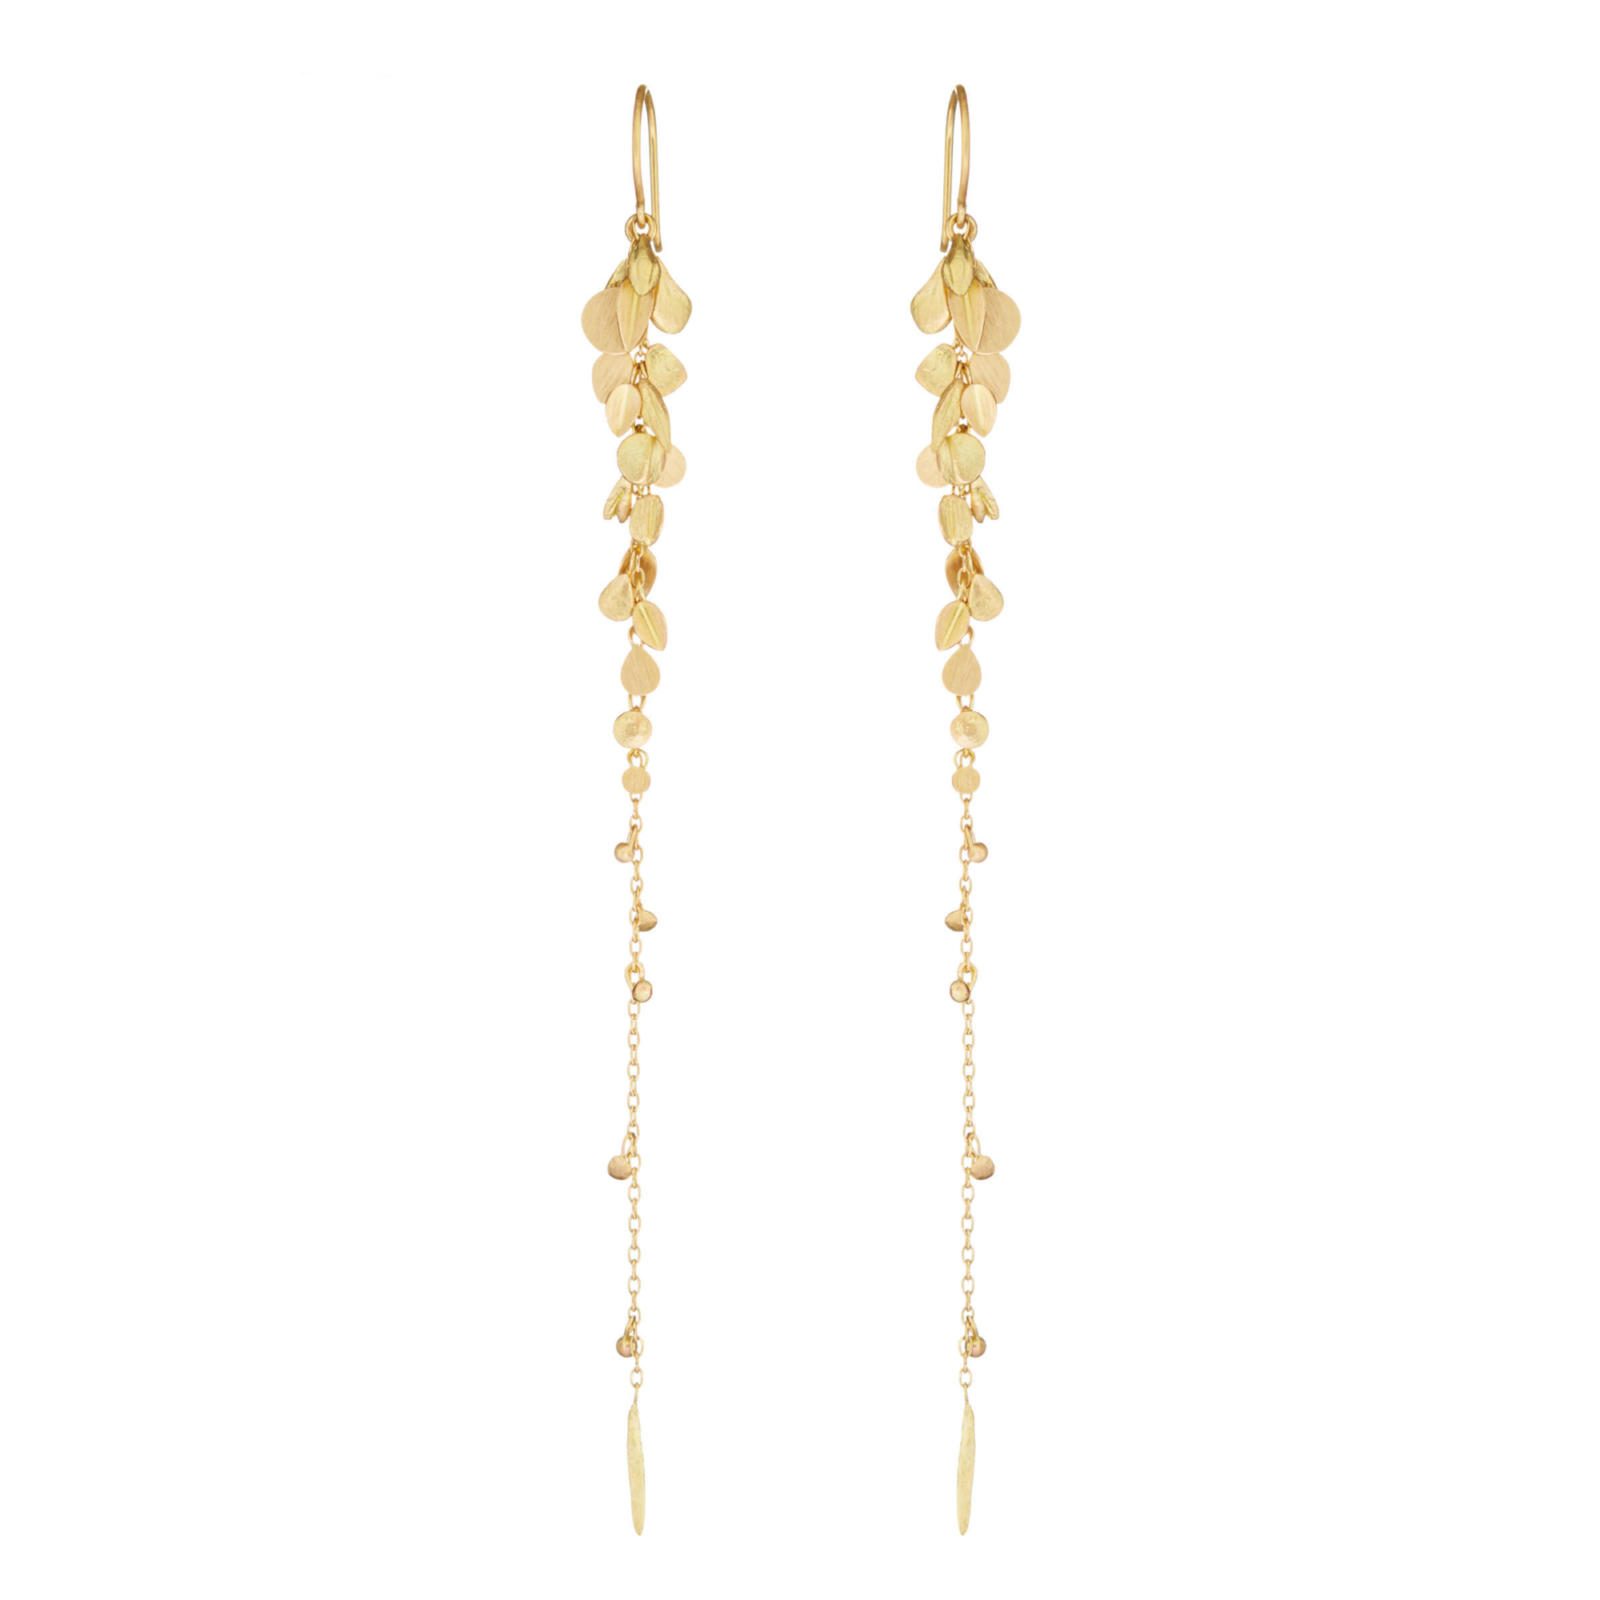 Sia Taylor ME1 Y Yellow Gold Earrings WB